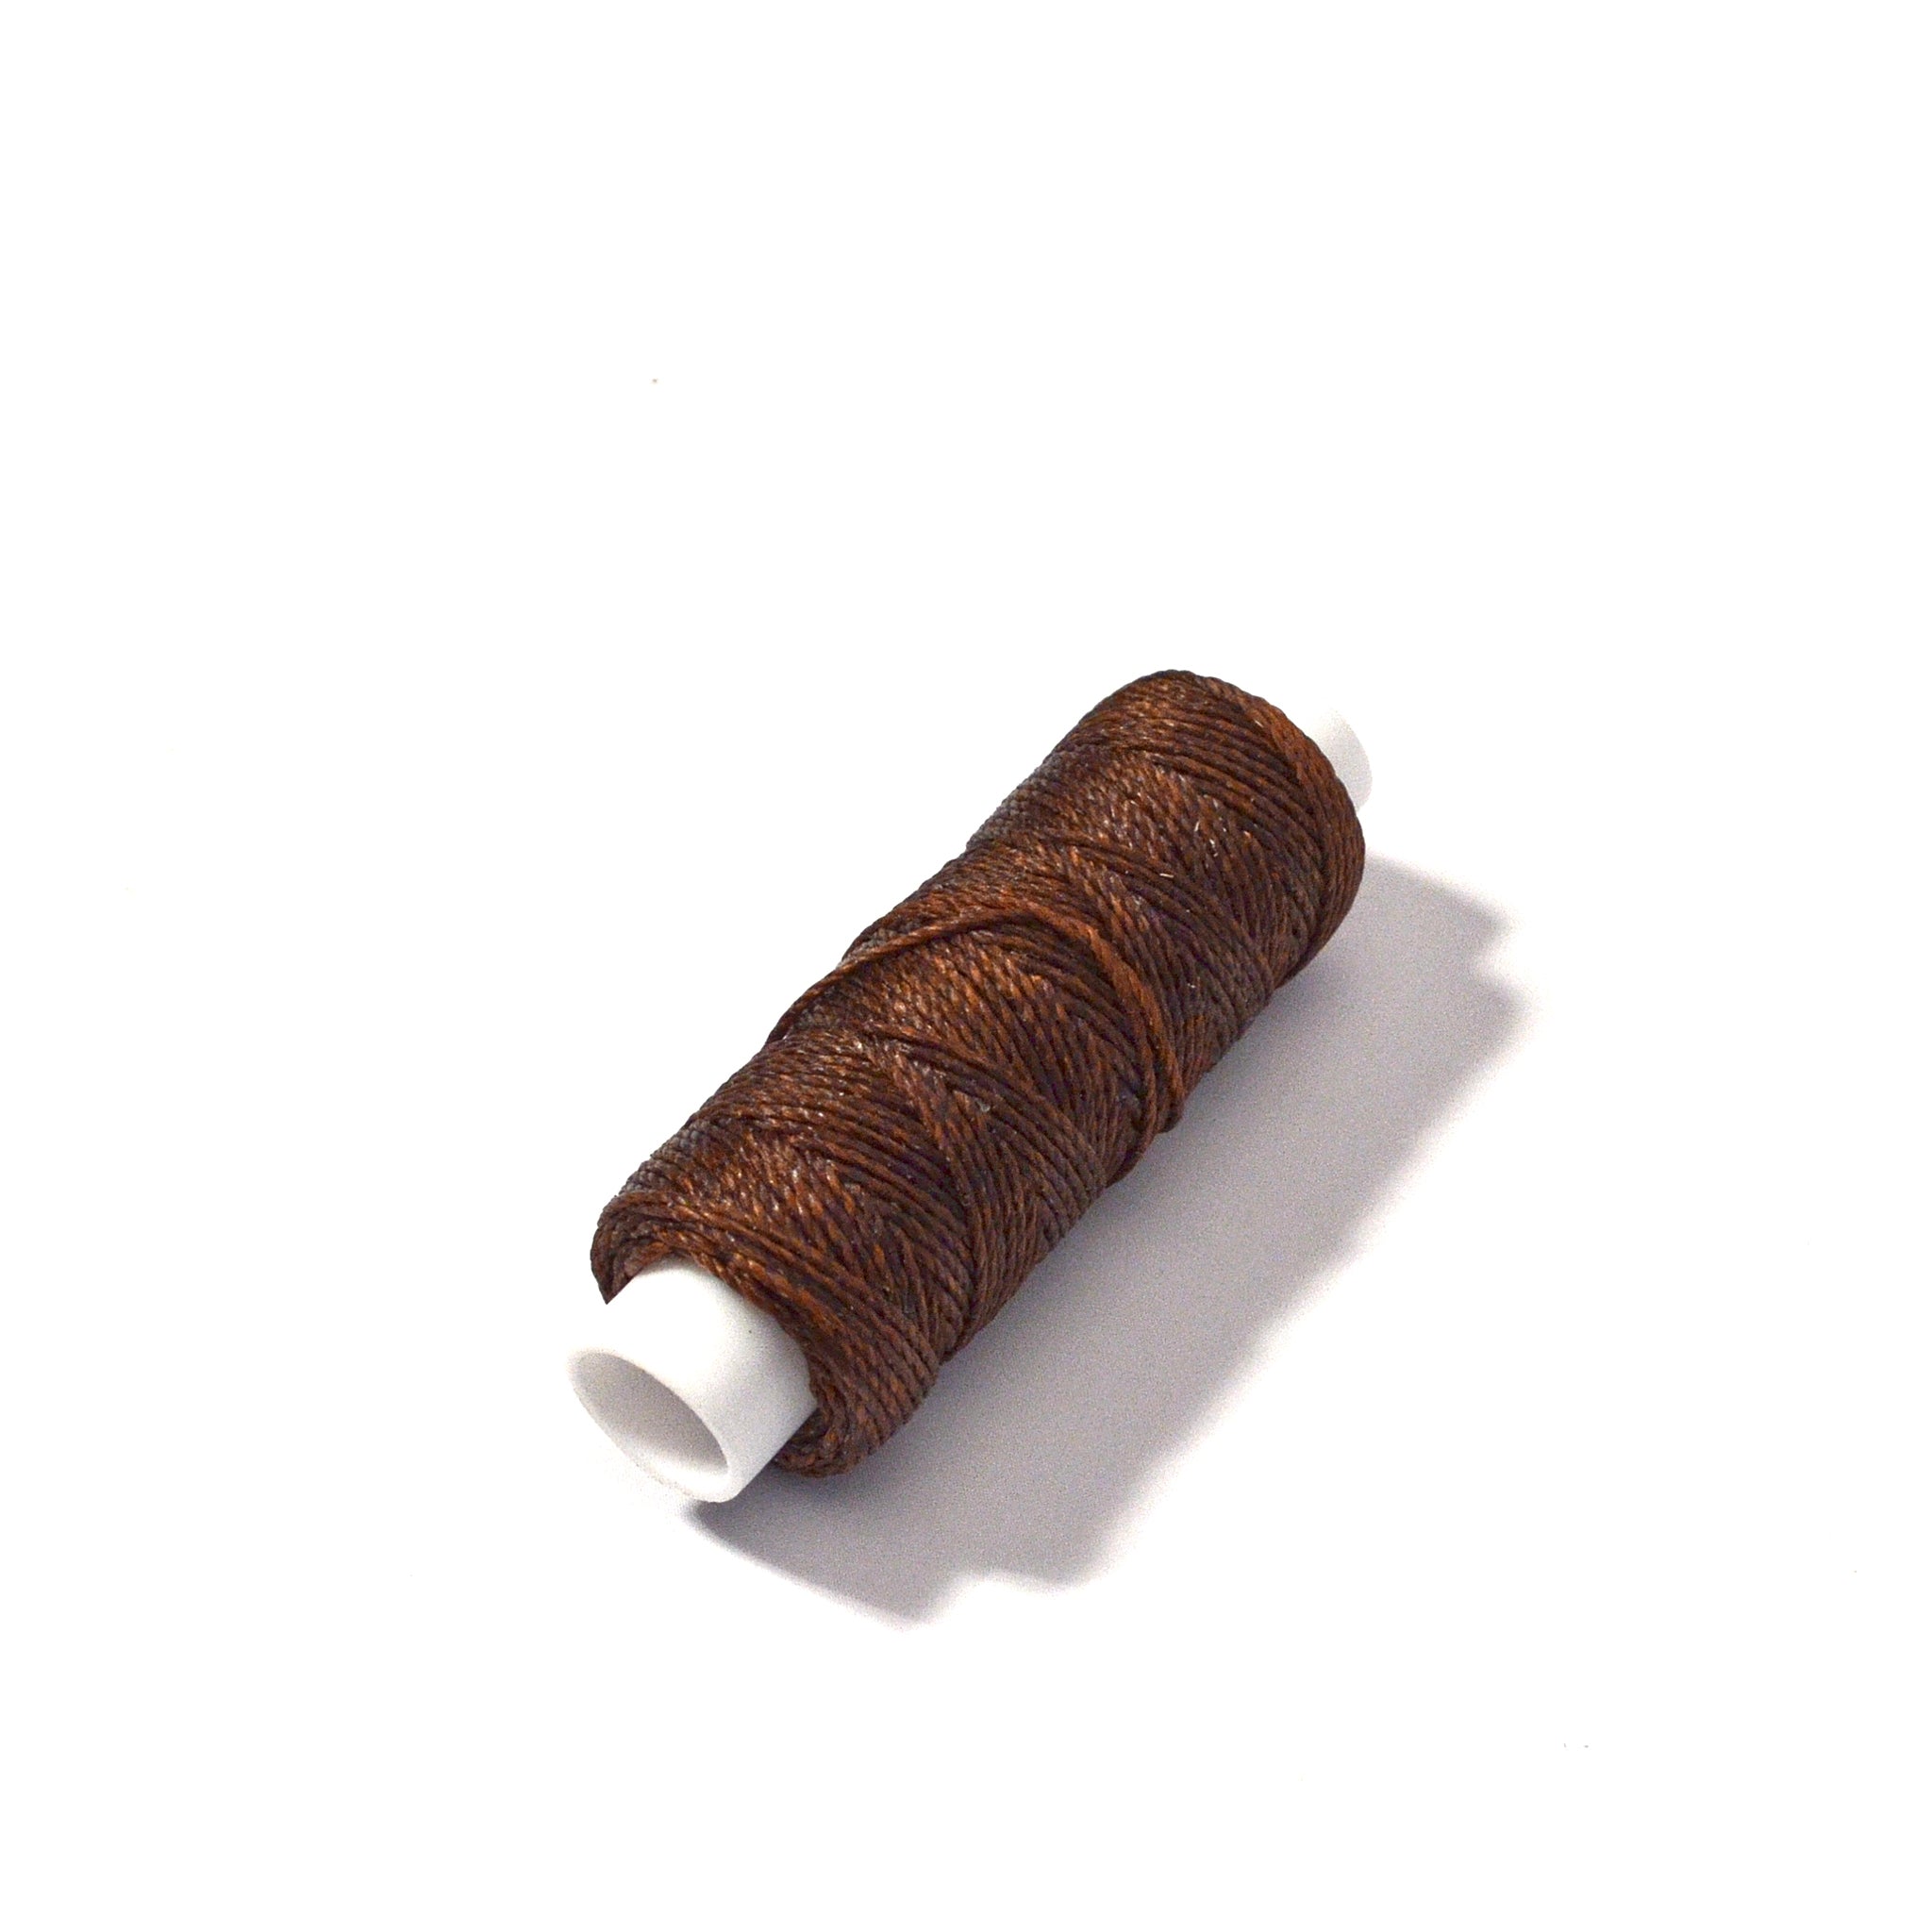 Brown Waxed Nylon Thread from Identity Leathercraft